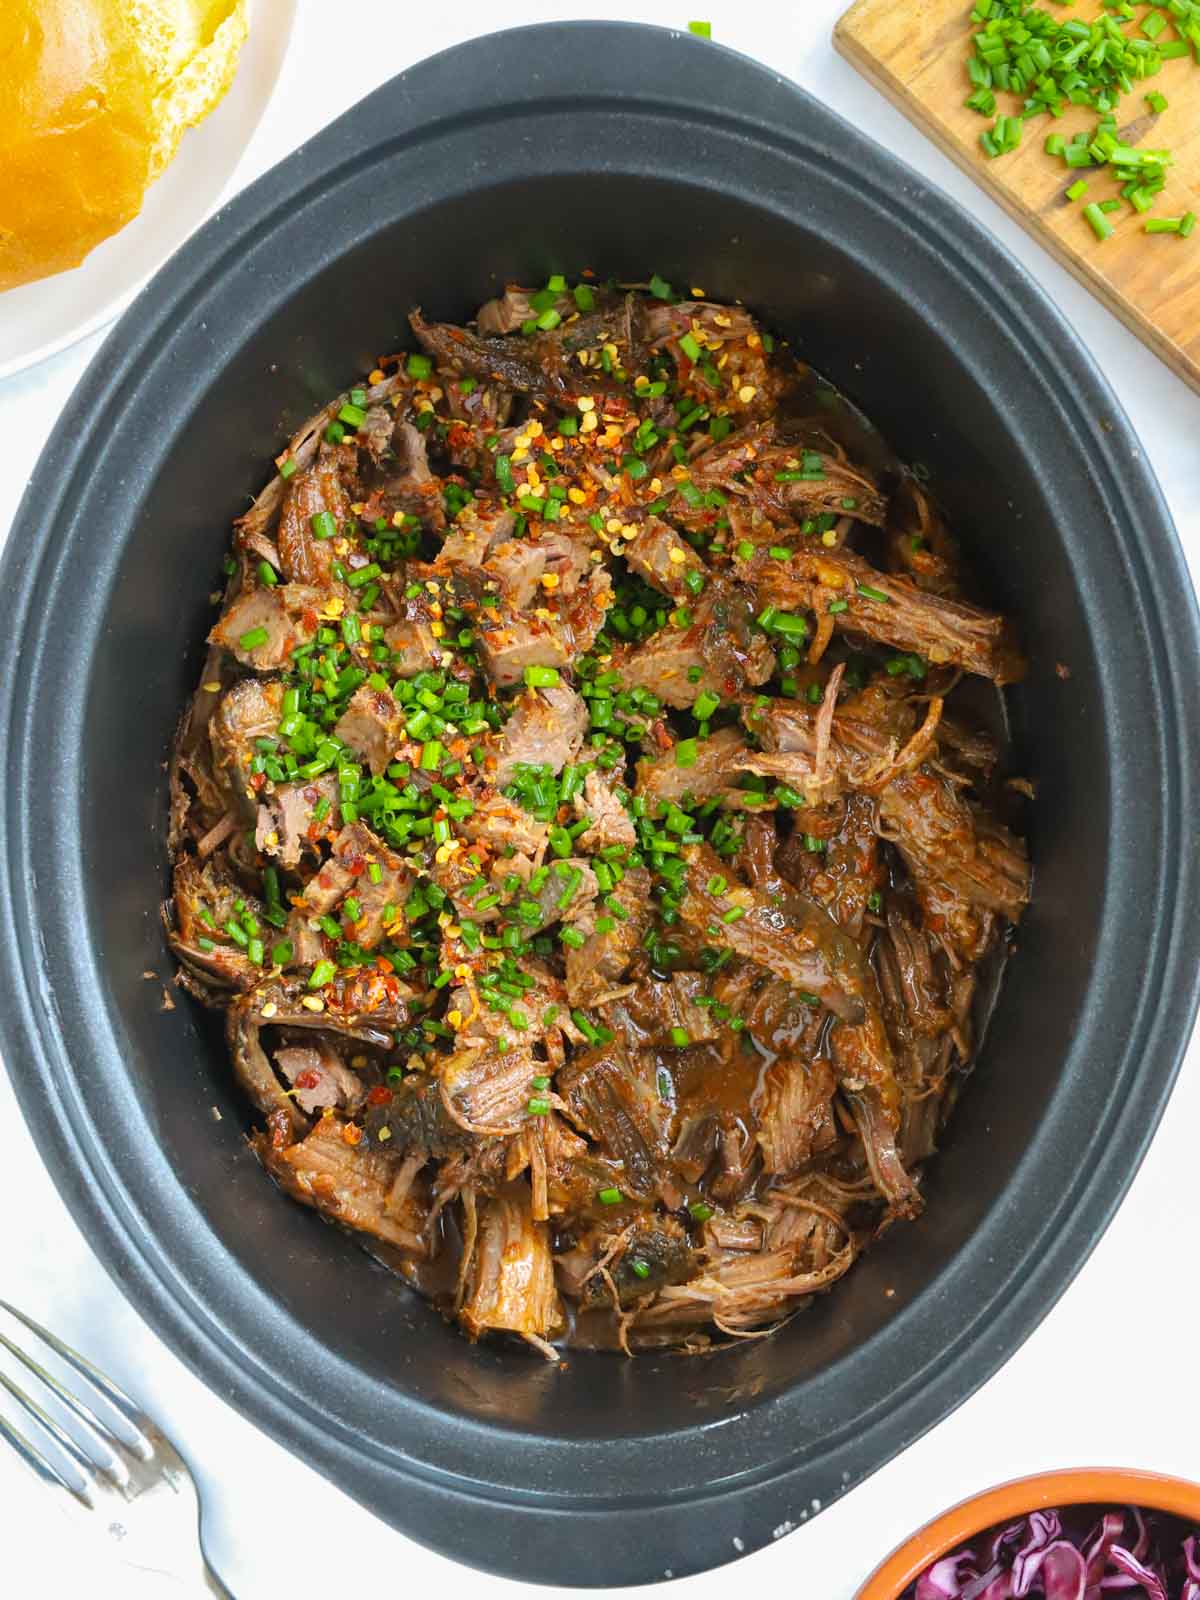 Beef brisket slow cooked in a slow cooker.